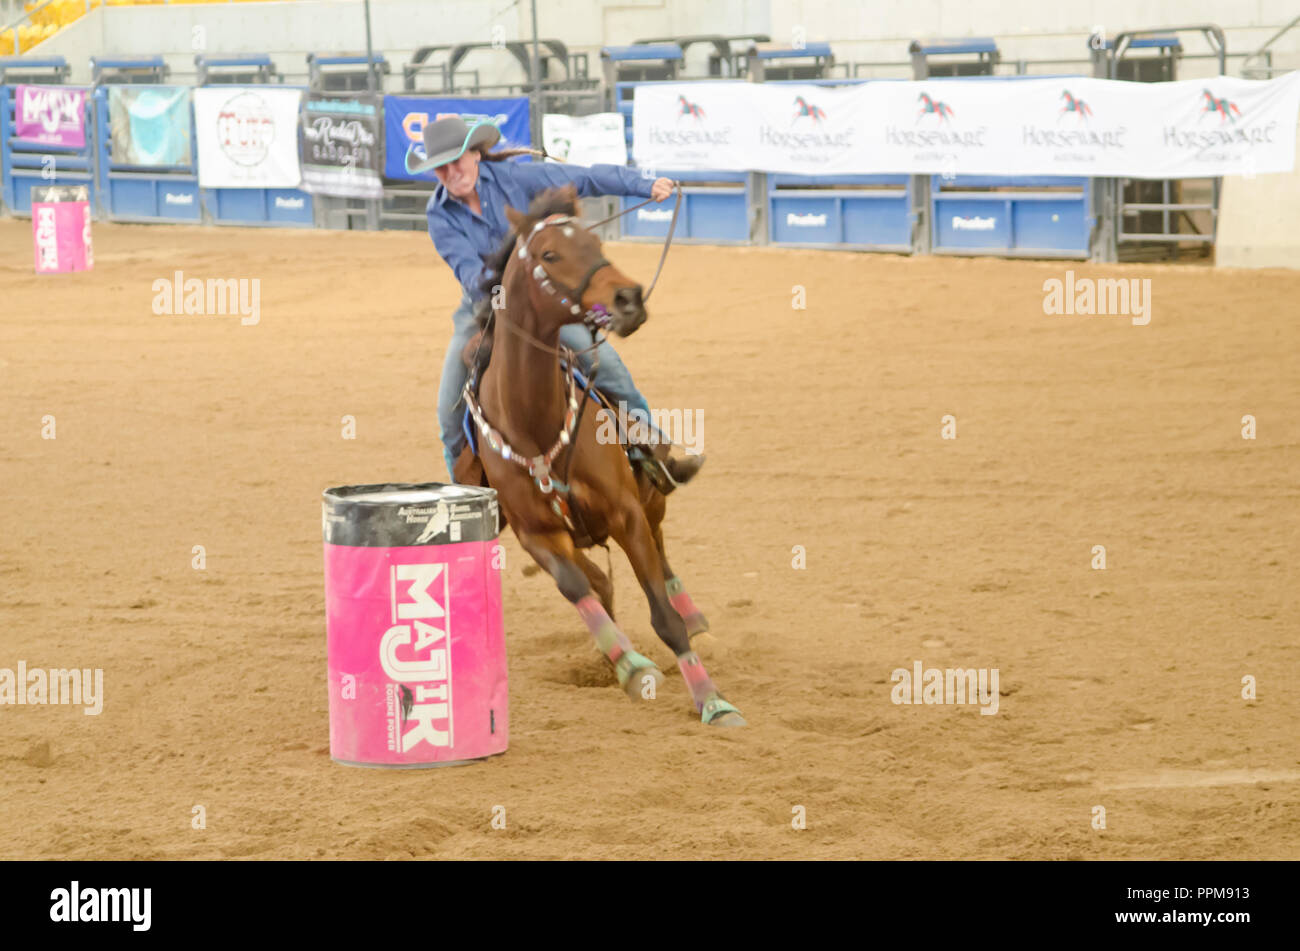 Rider desperately trying to steer horse away from the barrel to avoid a penalty. Tamworth NSW Australia. Stock Photo